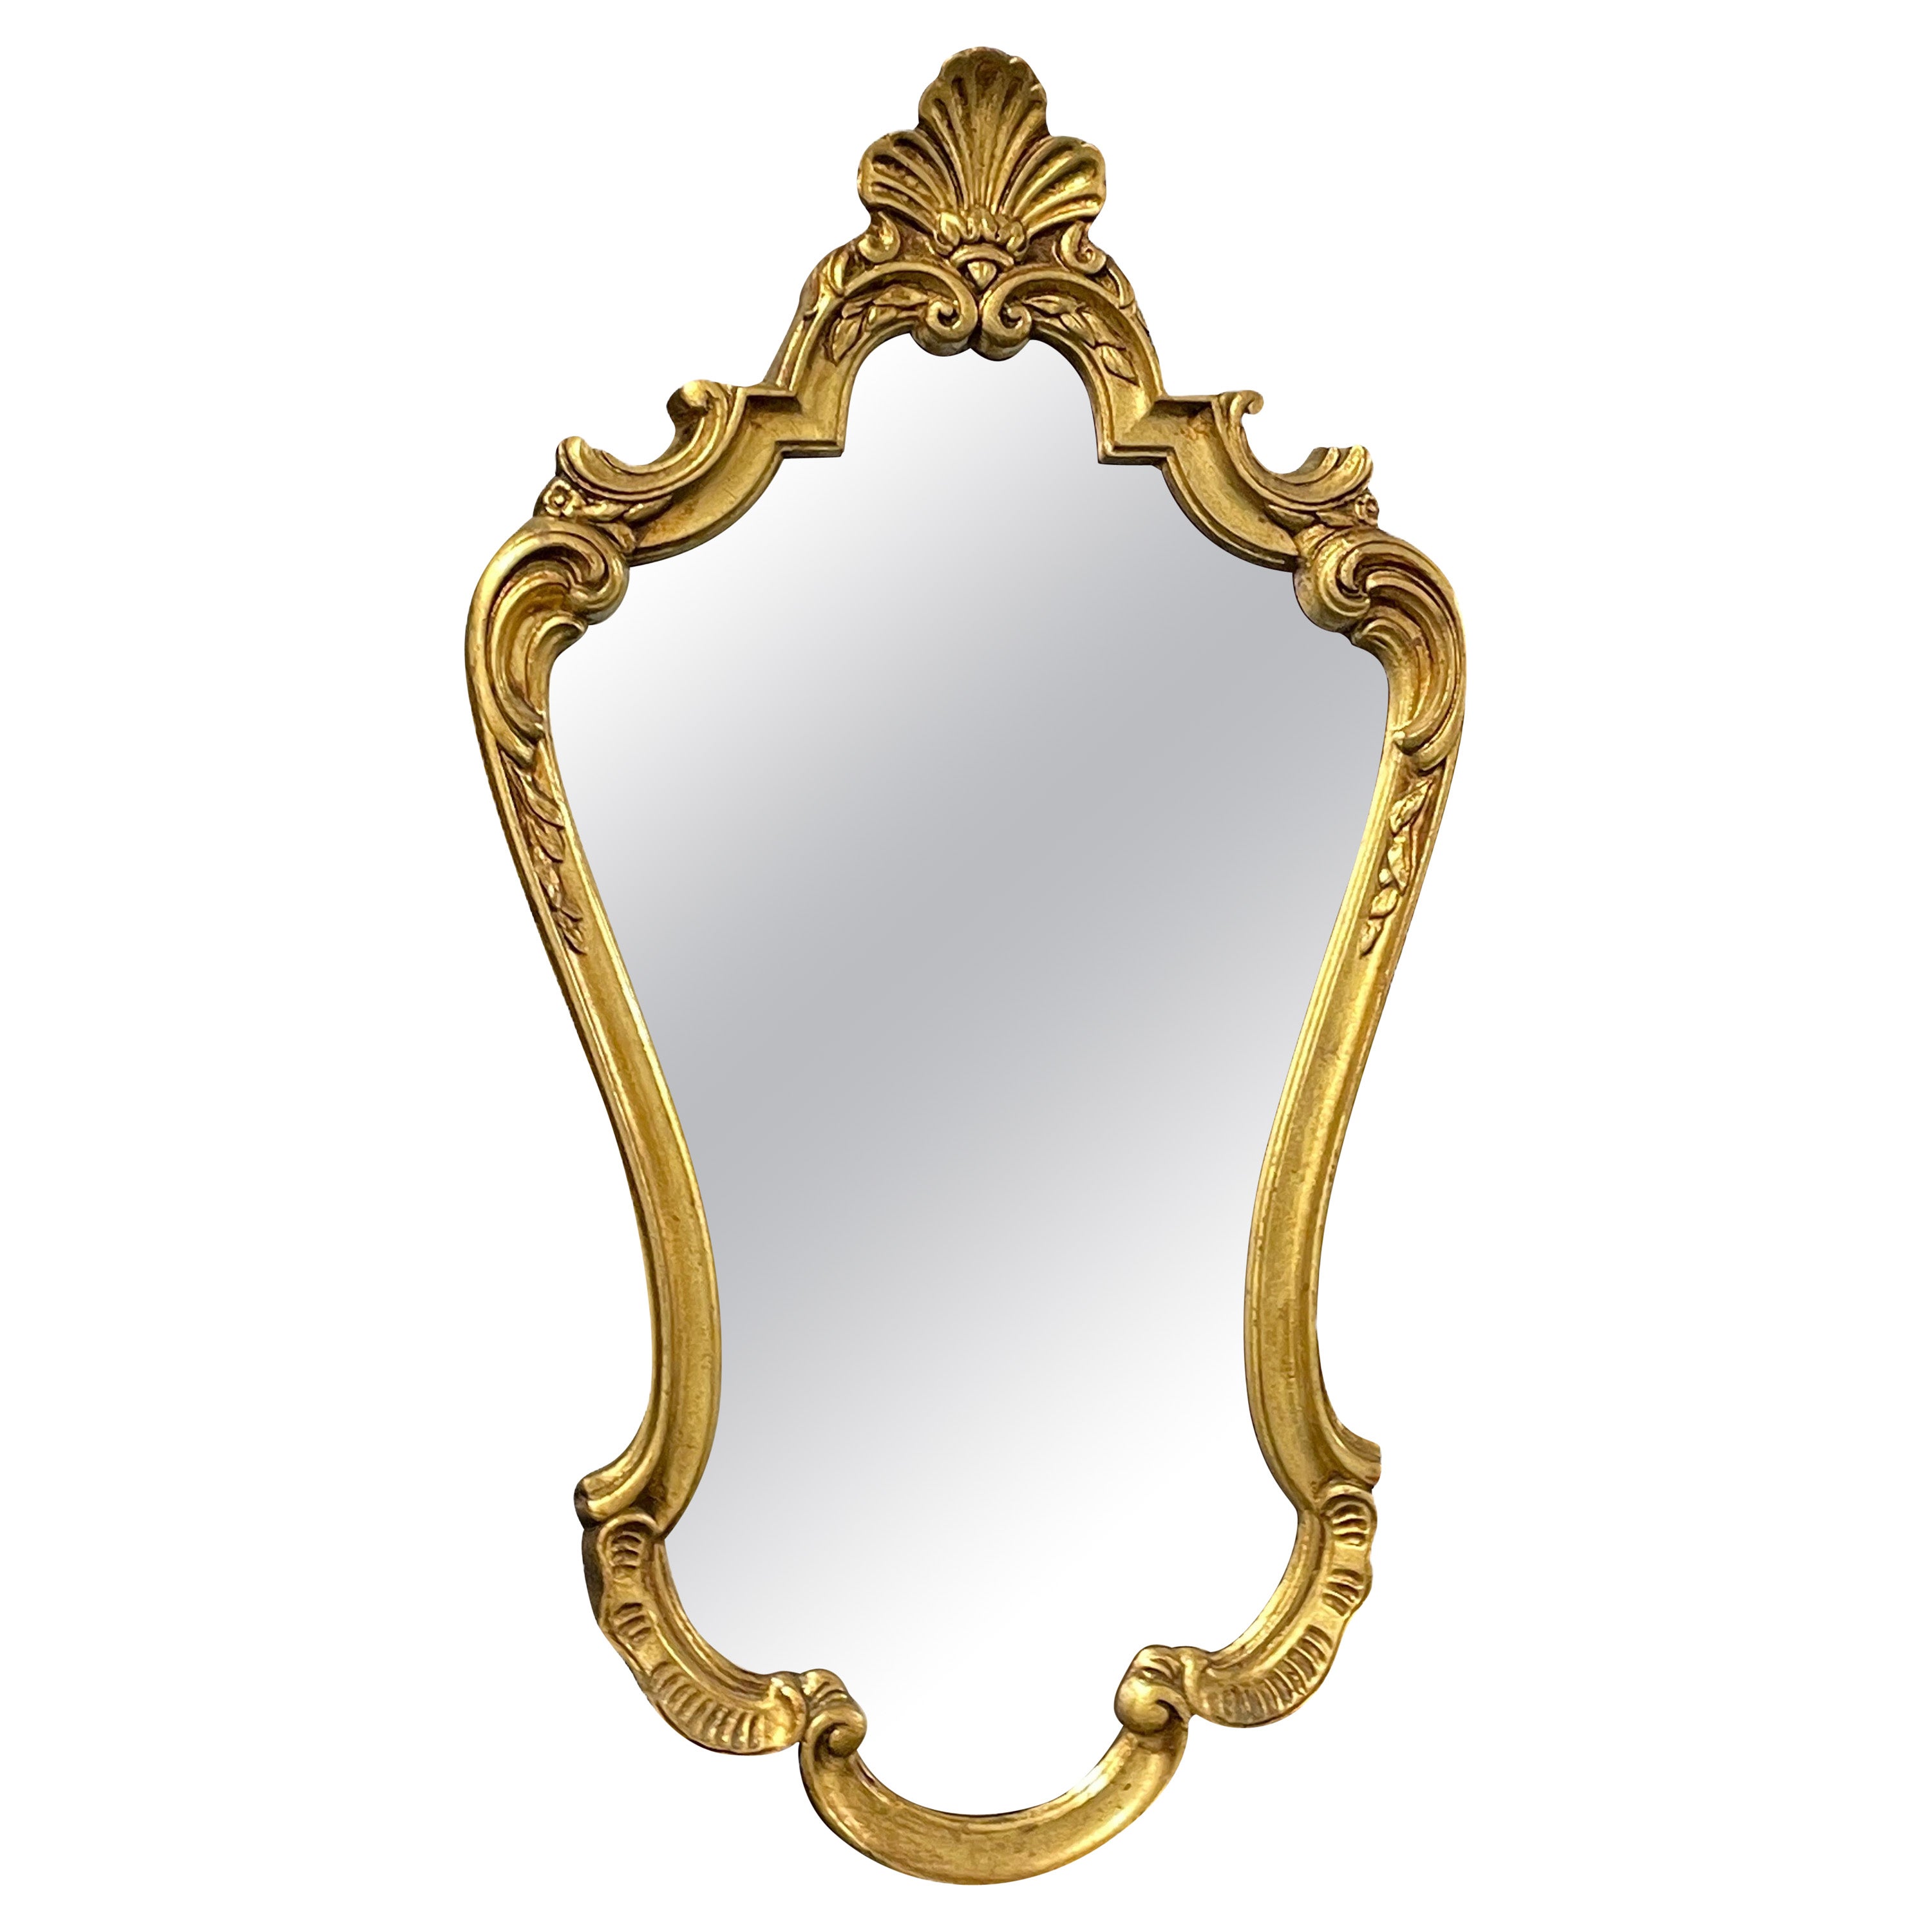 Beautiful Stunning Gilded Tole Toleware Mirror Vintage, Italy, 1950s